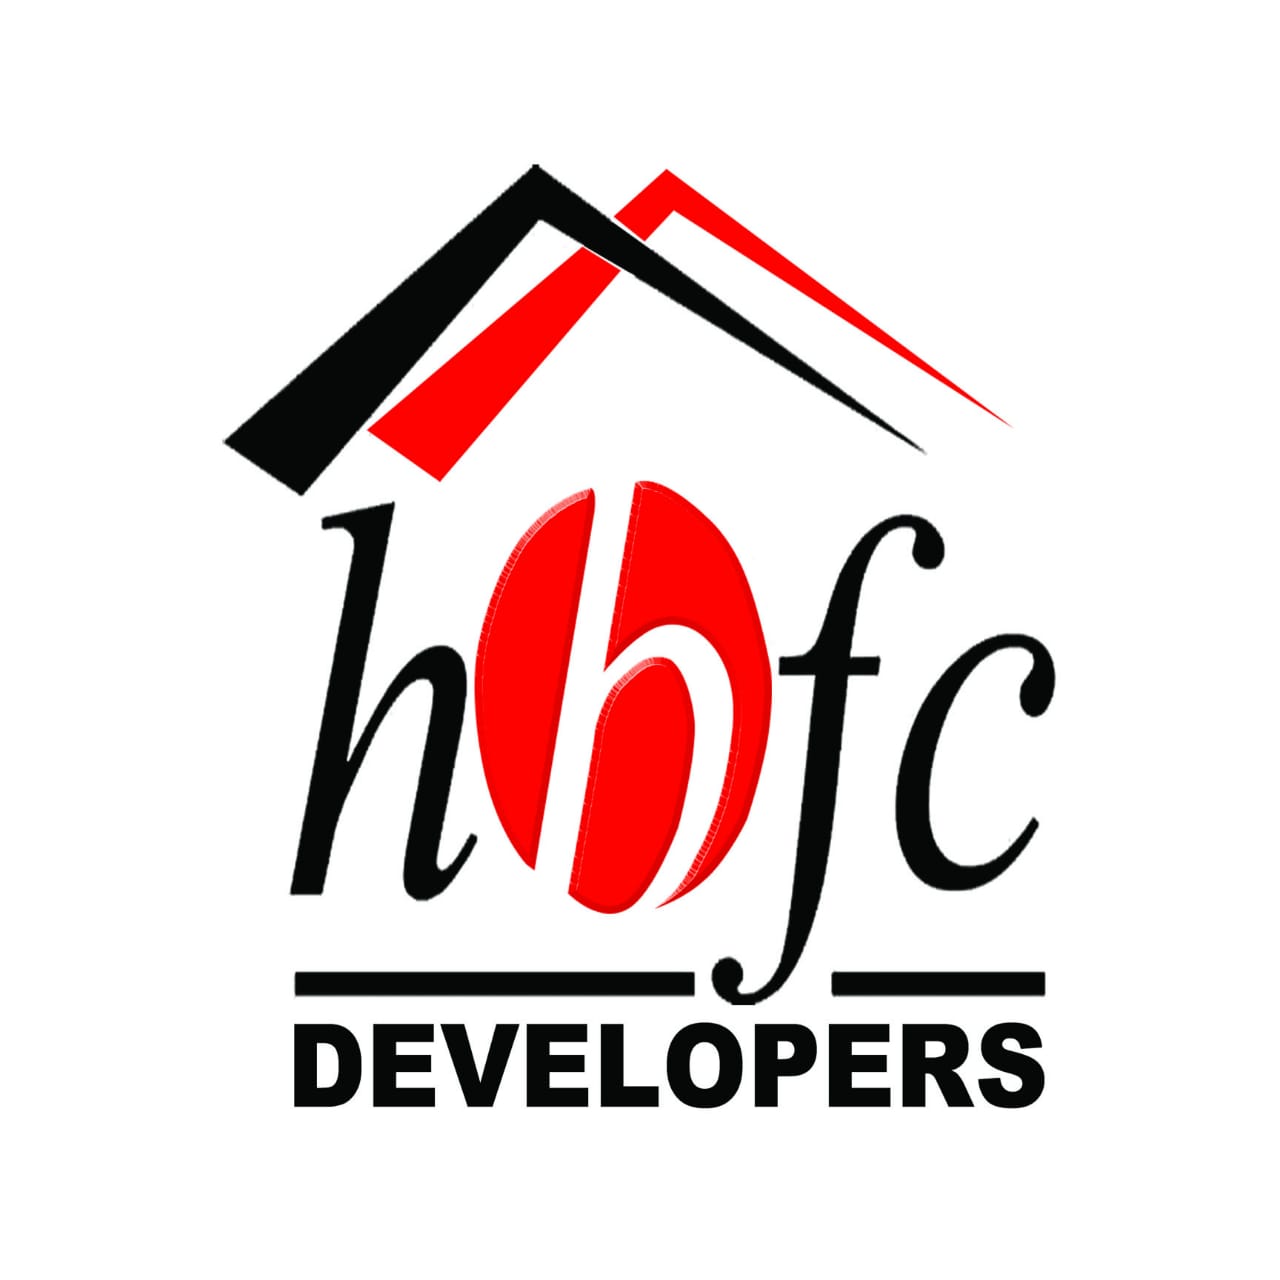 HBFC Developers: Find New & Upcoming Projects by HBFC Developers